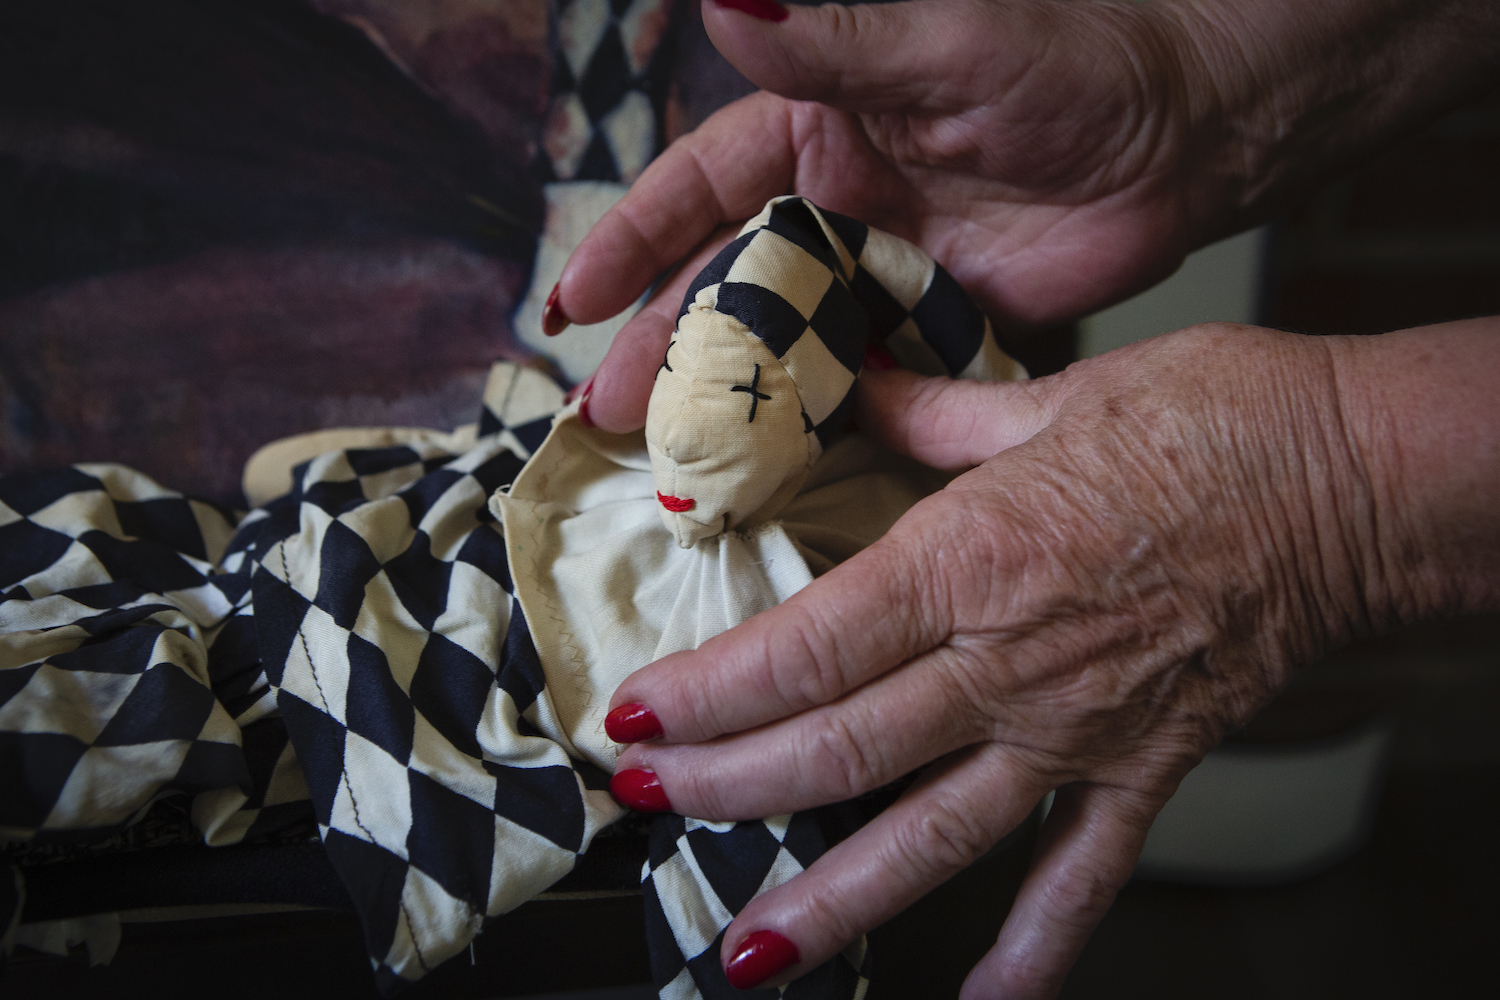 A close up picture of Tilly Berghege's hands holding up a doll she sewed together to create. 